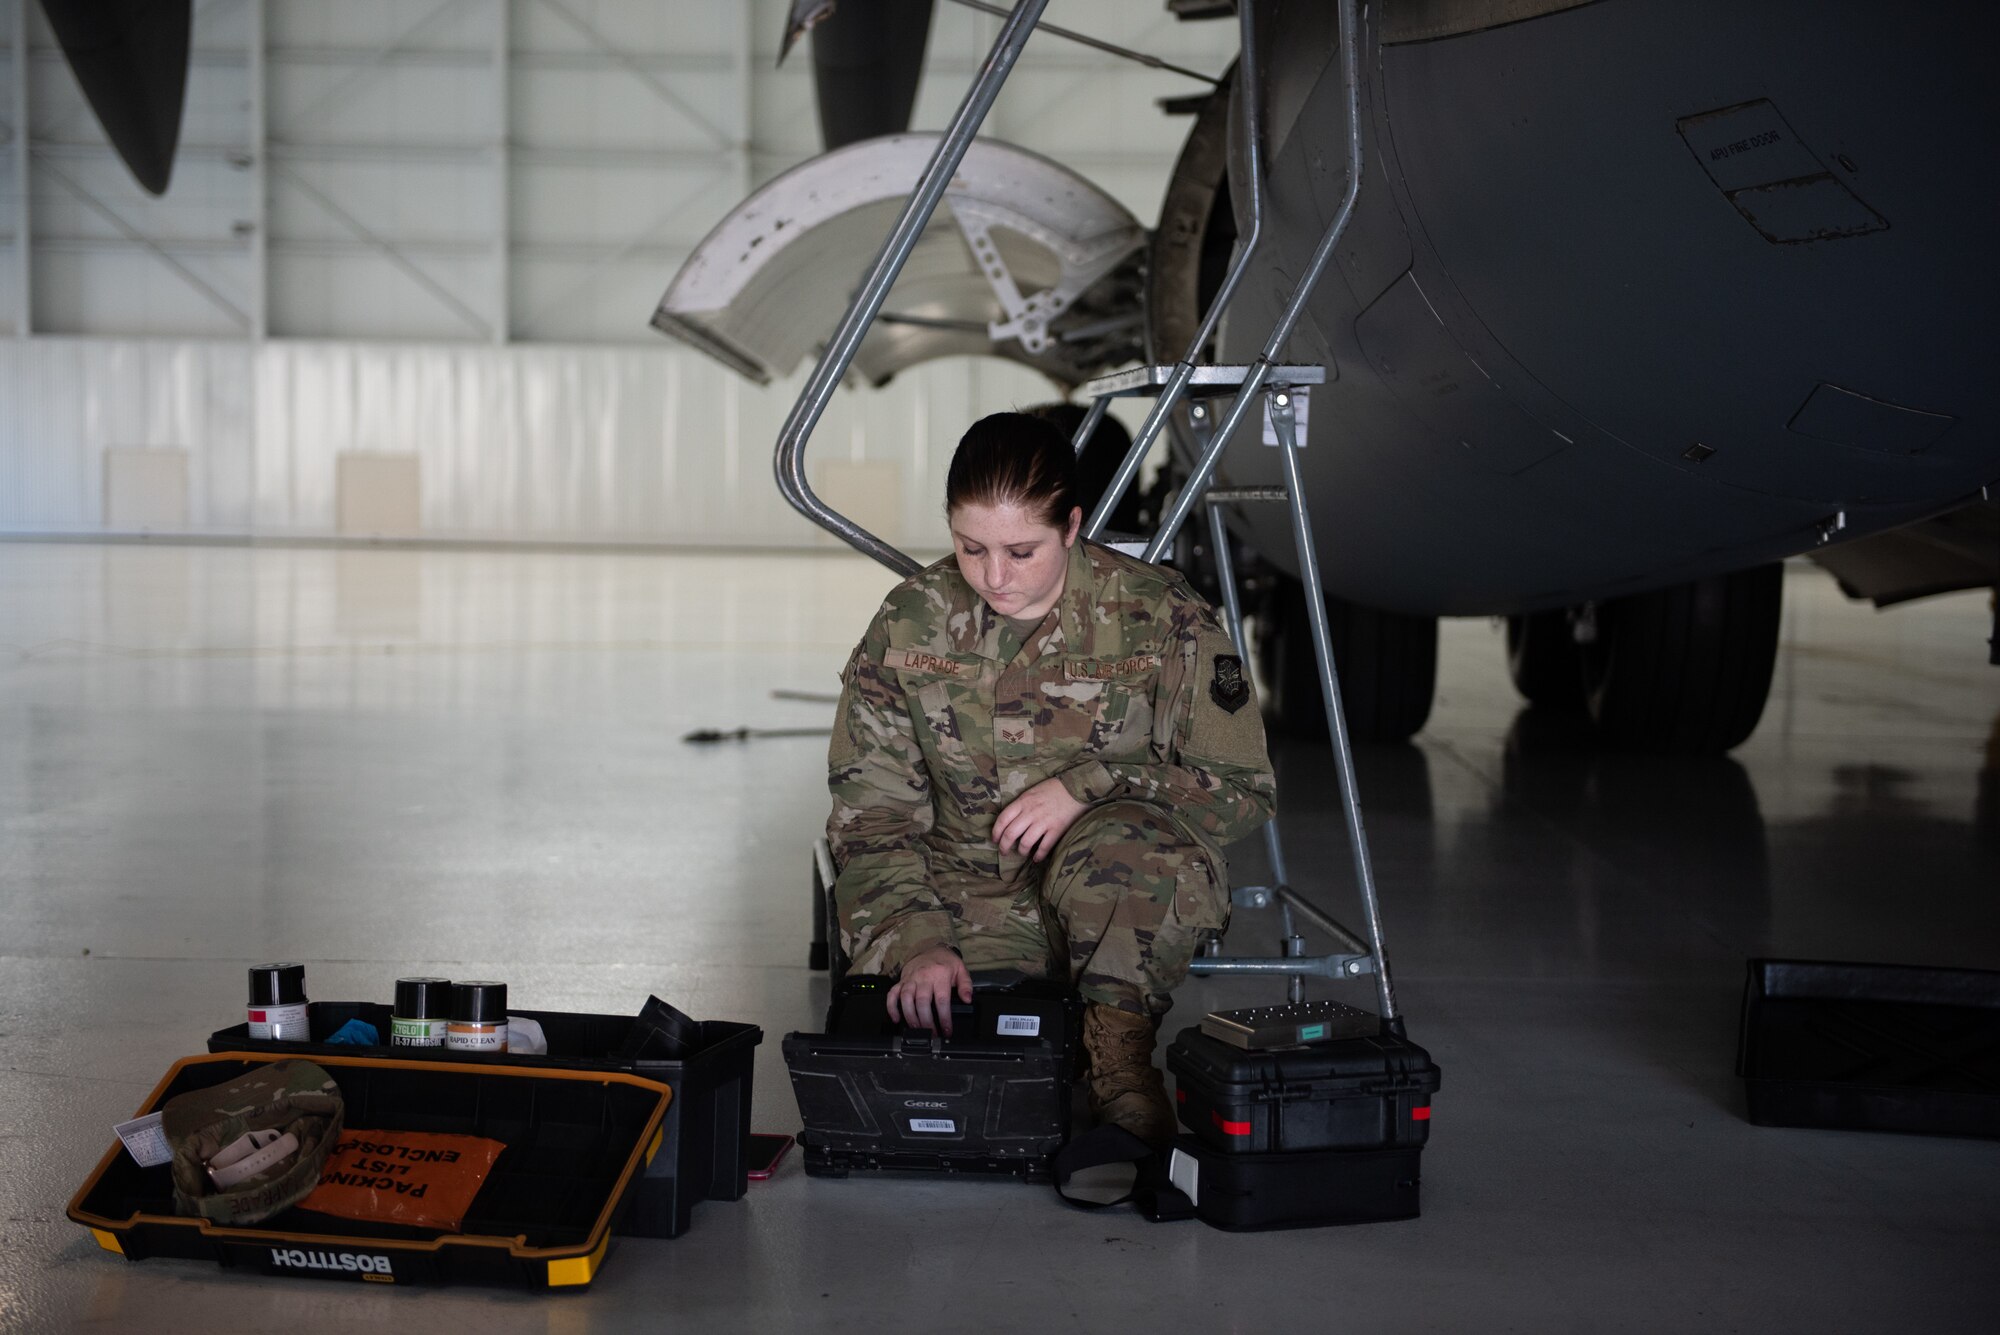 U.S. Air Force Senior Airman Kayla Laprade, 62nd Maintenance Squadron nondestructive inspection journeyman, reviews technical orders June 3, 2019, at Travis Air Force Base, California, prior to the inspection of the ram air inlet of a C-17 Globemaster III assigned to Joint Base Lewis-McChord, Washington. In February, JBLM sent its entire C-17 fleet to Travis to complete required maintenance and inspections. (U.S. Air Force photo by Tech. Sgt. James Hodgman)